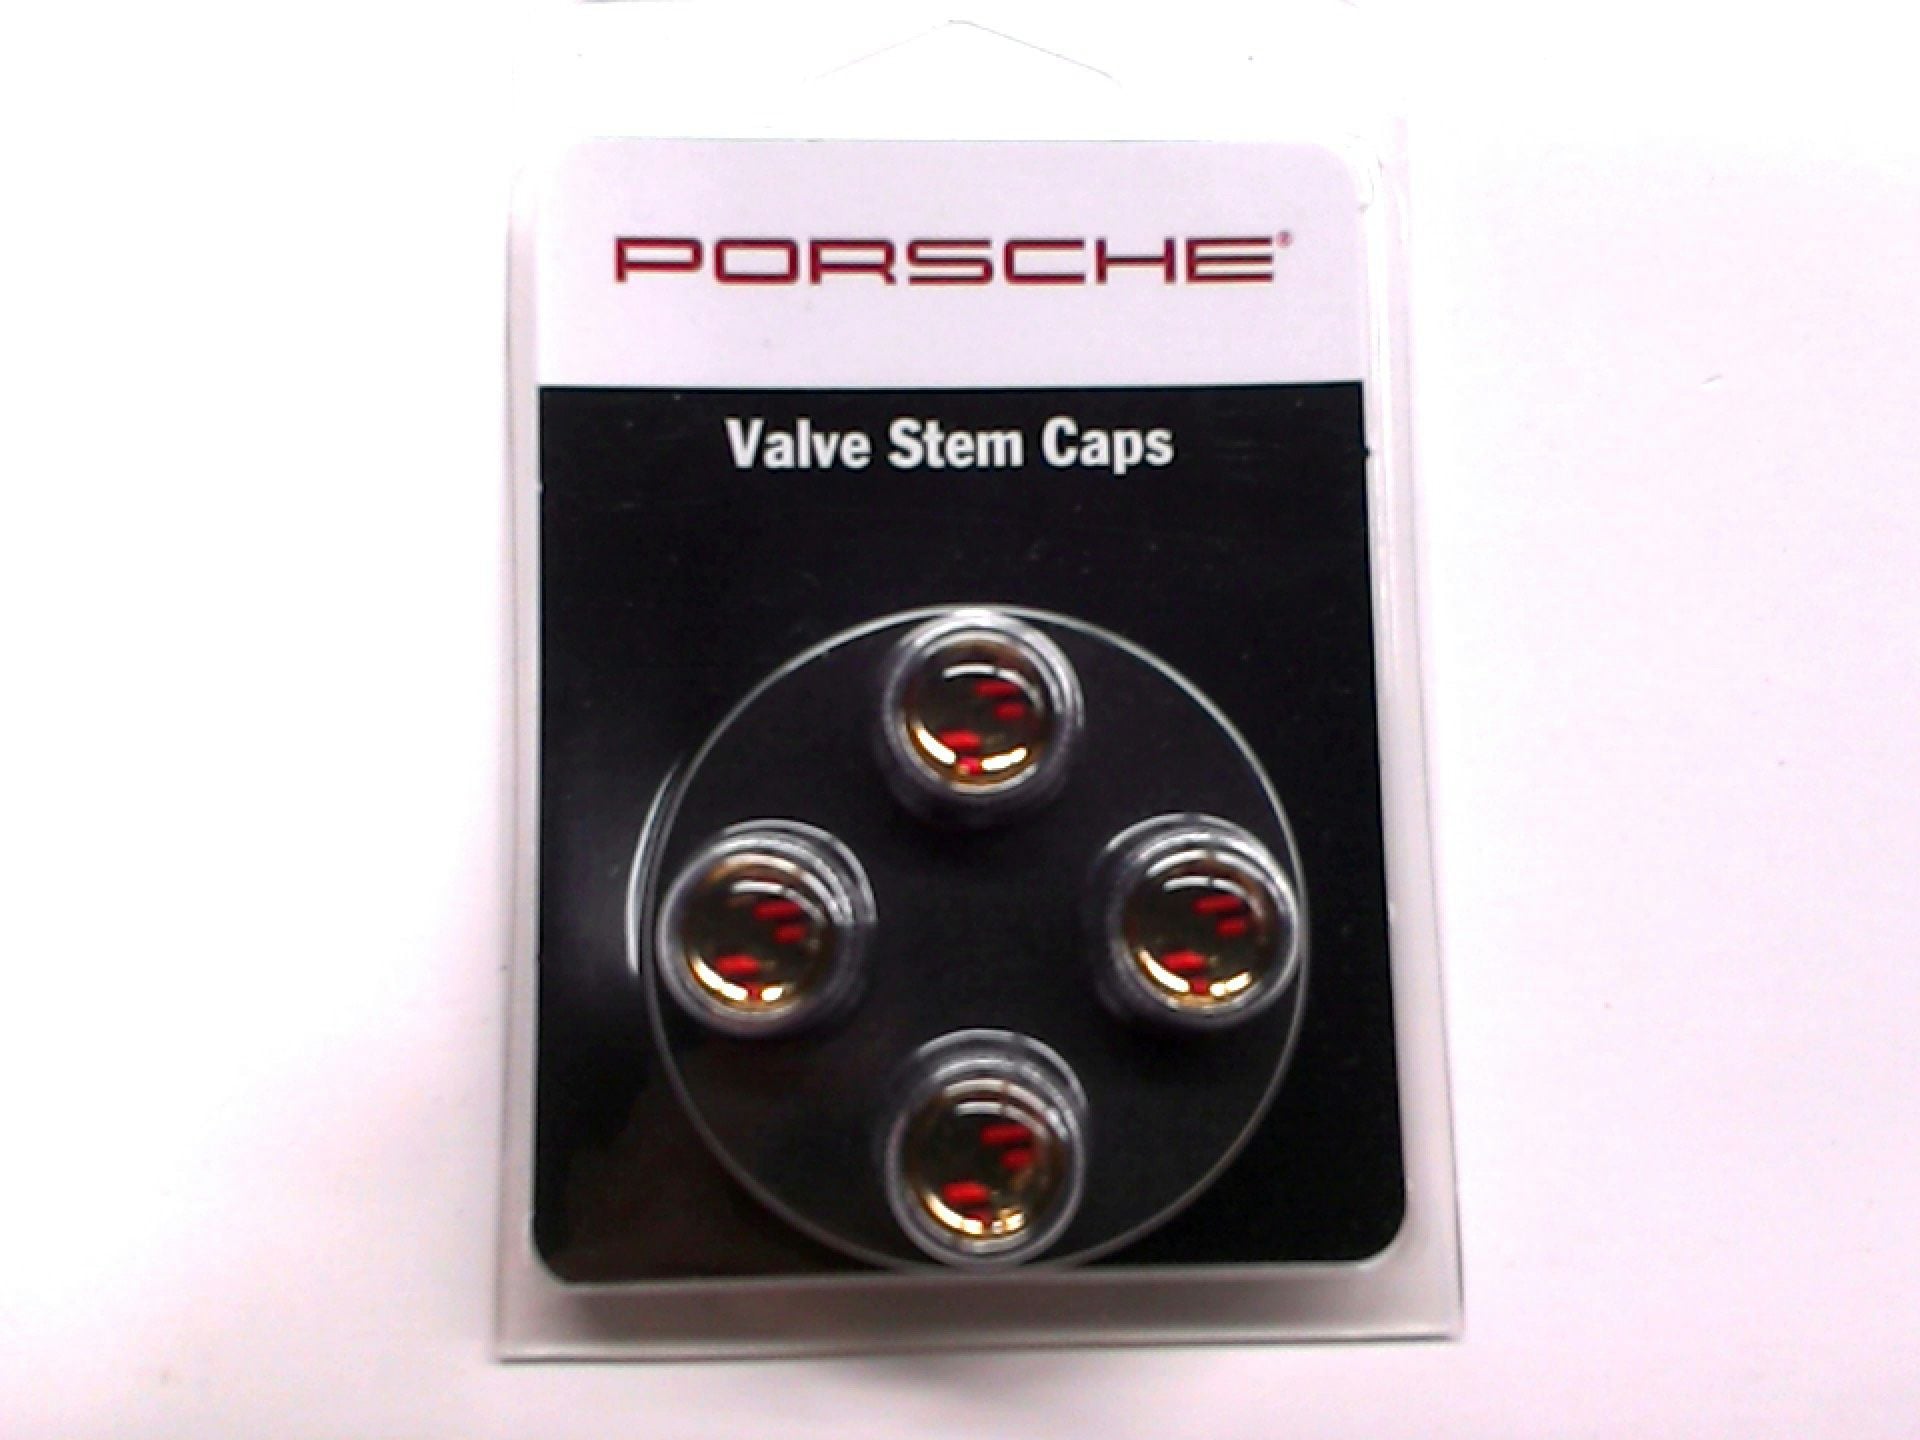 Accessories - Black Porsche Key Chain OEM and Valve Stem Caps OEM Both Unused - New - Dundee, IL 60118, United States